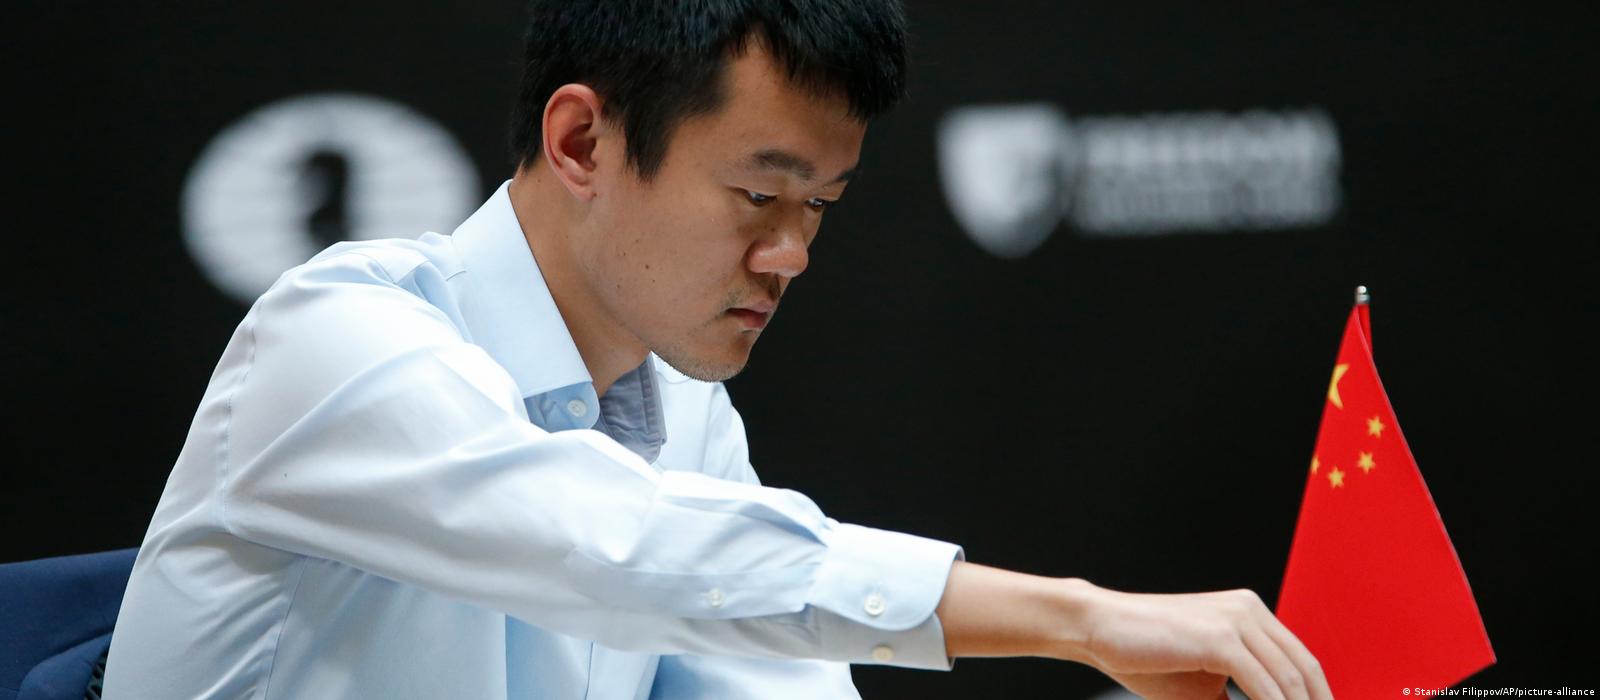 chess24.com on X: Congratulations to Ding Liren on becoming the 17th World  Chess Champion and the 1st Chinese World Champion!   #NepoDing #c24live  / X